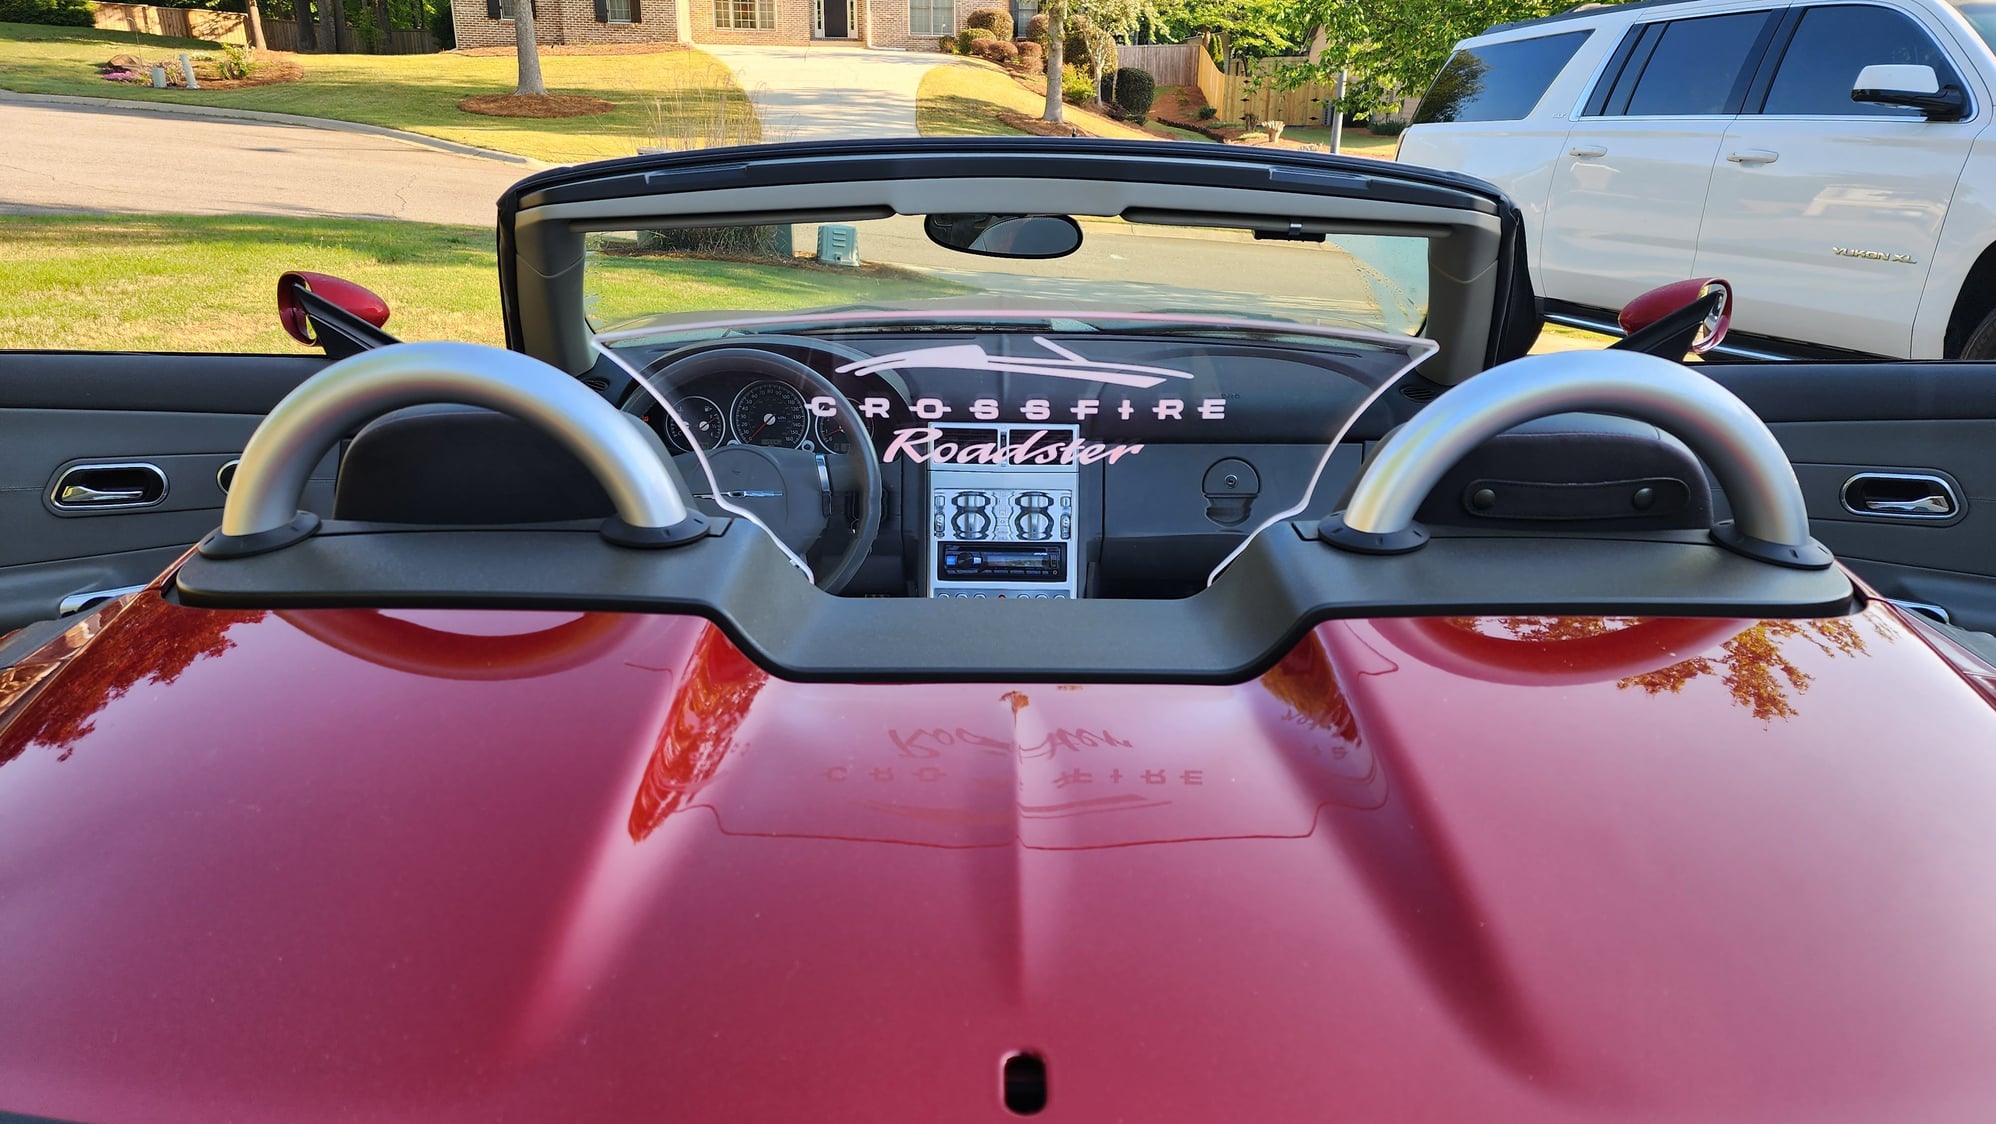 2005 Chrysler Crossfire - 2005 roadster limited-red crystal blaze metallic - Used - VIN 1C3AN65L45X024543 - 32,000 Miles - 6 cyl - 2WD - Automatic - Convertible - Red - Acworth, GA 30102, United States